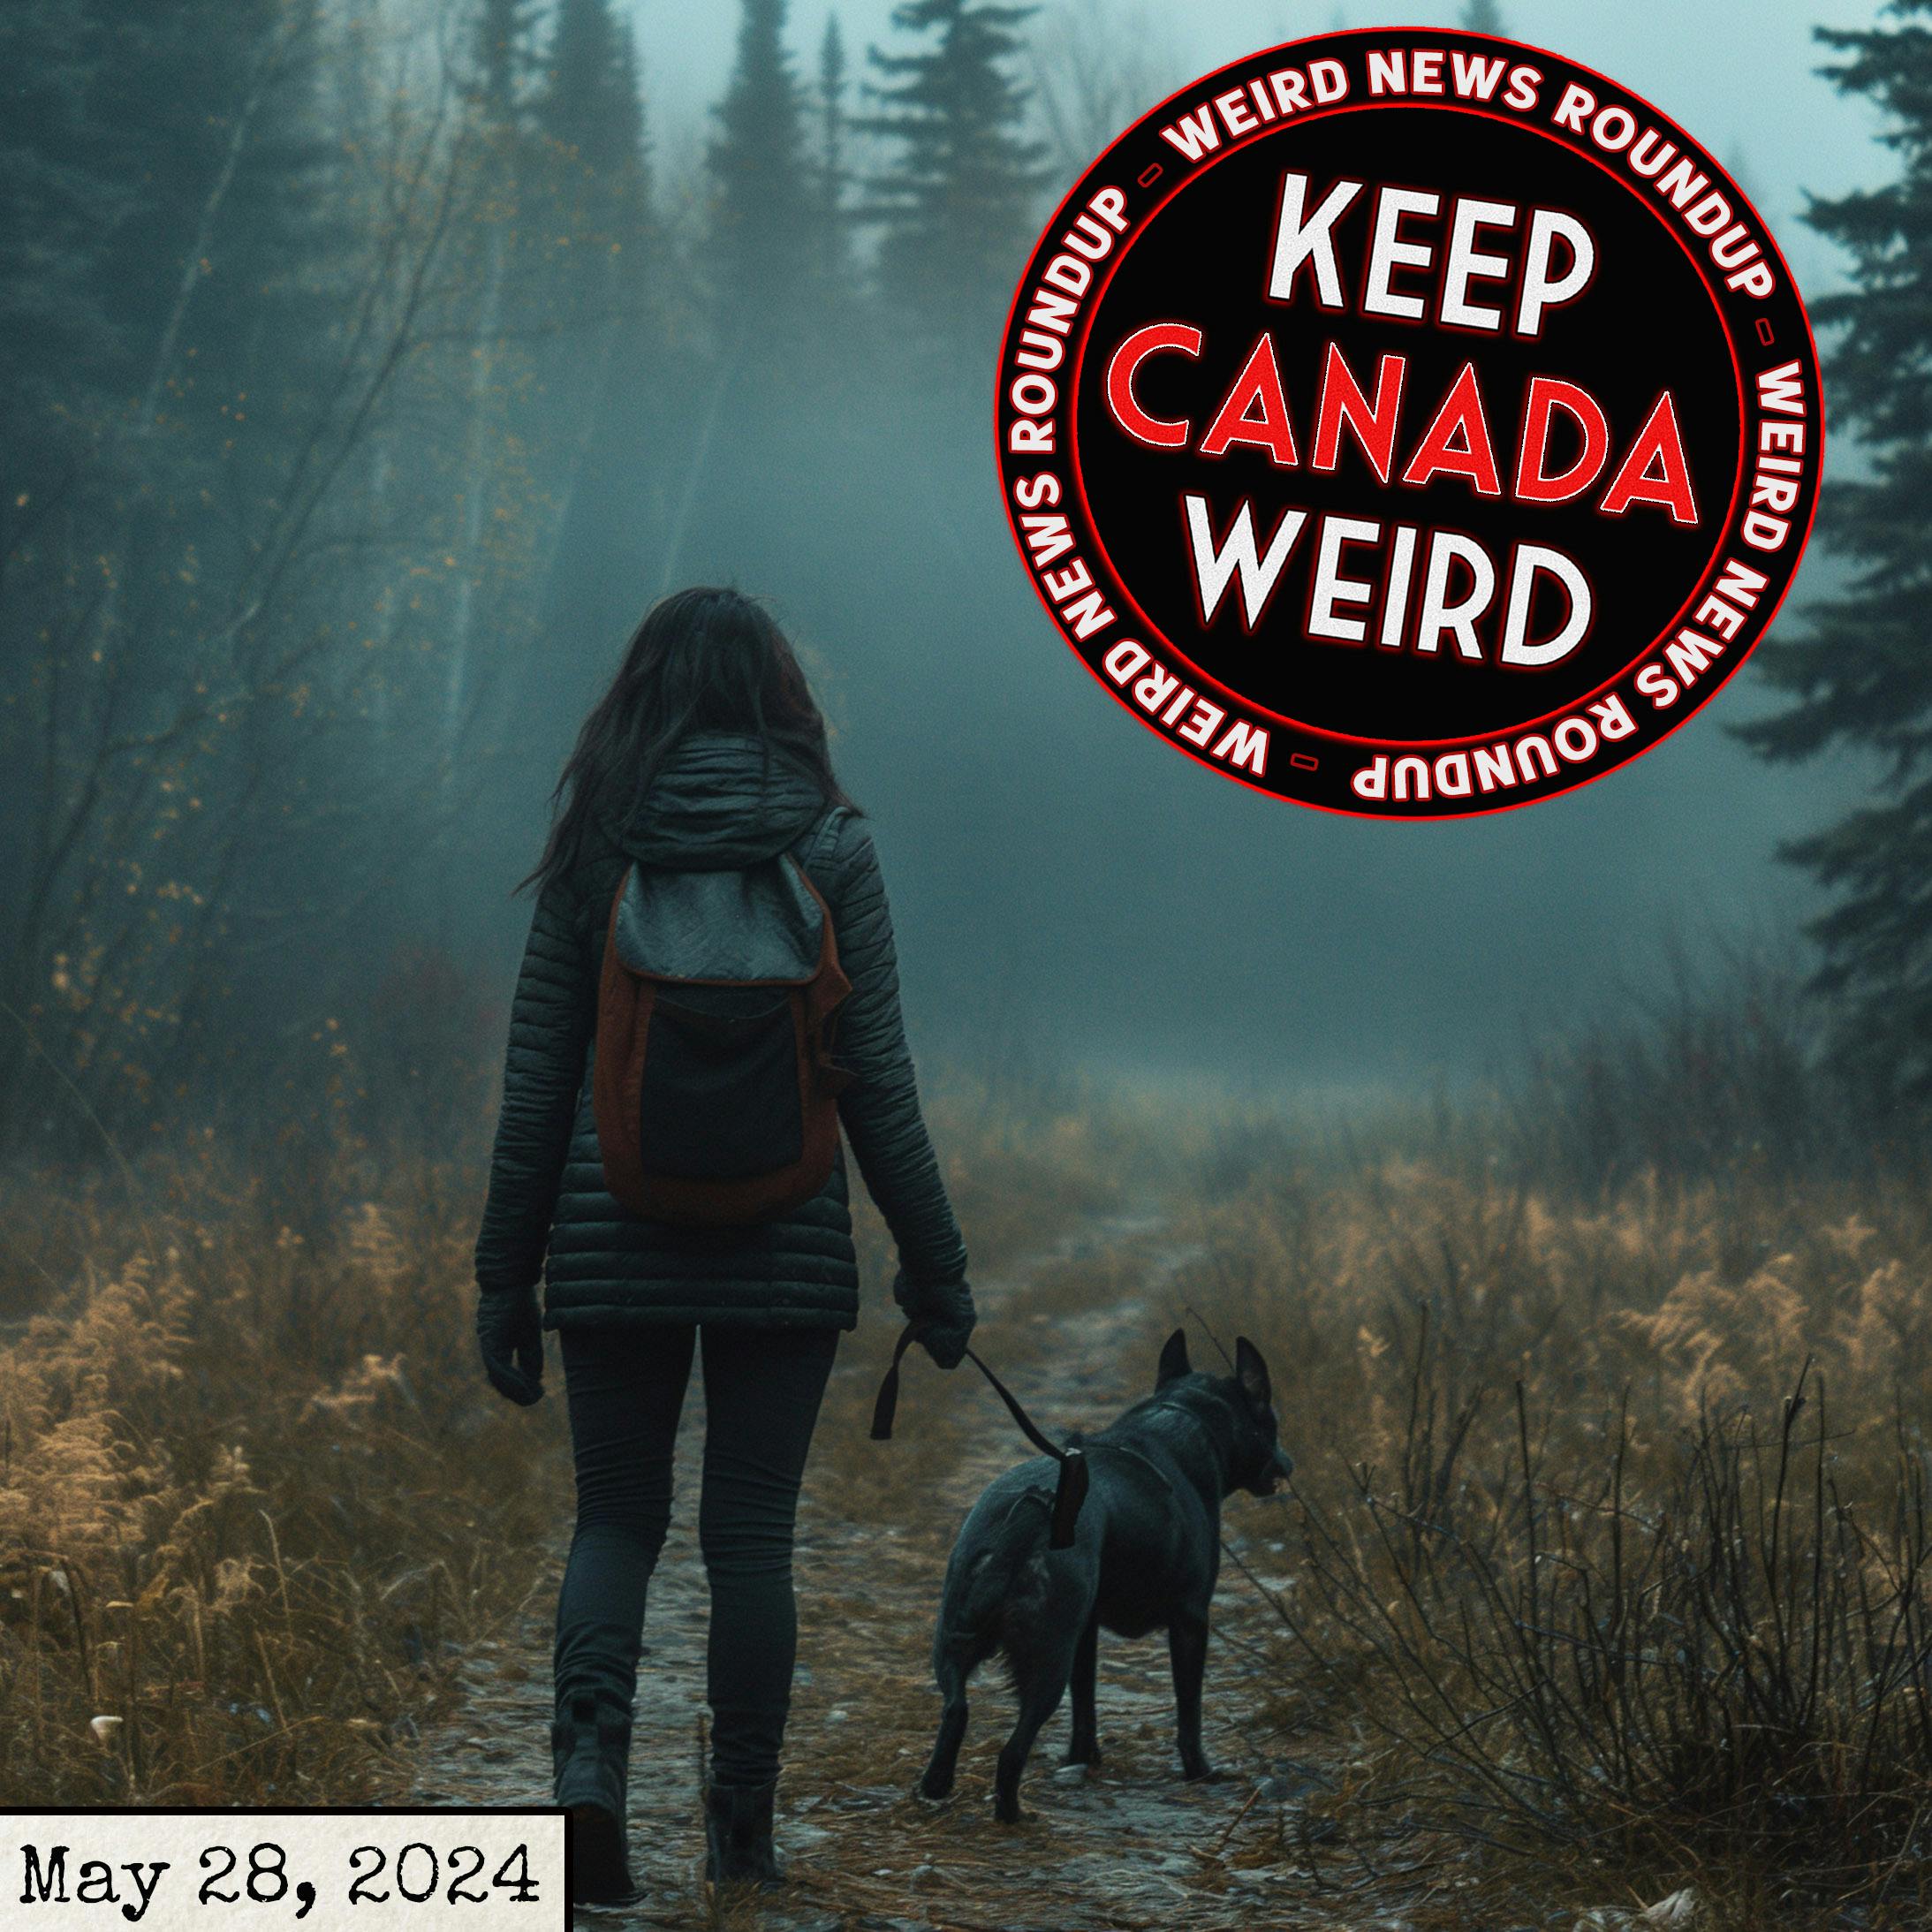 KEEP CANADA WEIRD - May 28, 2024 - late night lawncare, the Nova Scotia birdman, the rotisserie chicken mystery in the Yukon forest